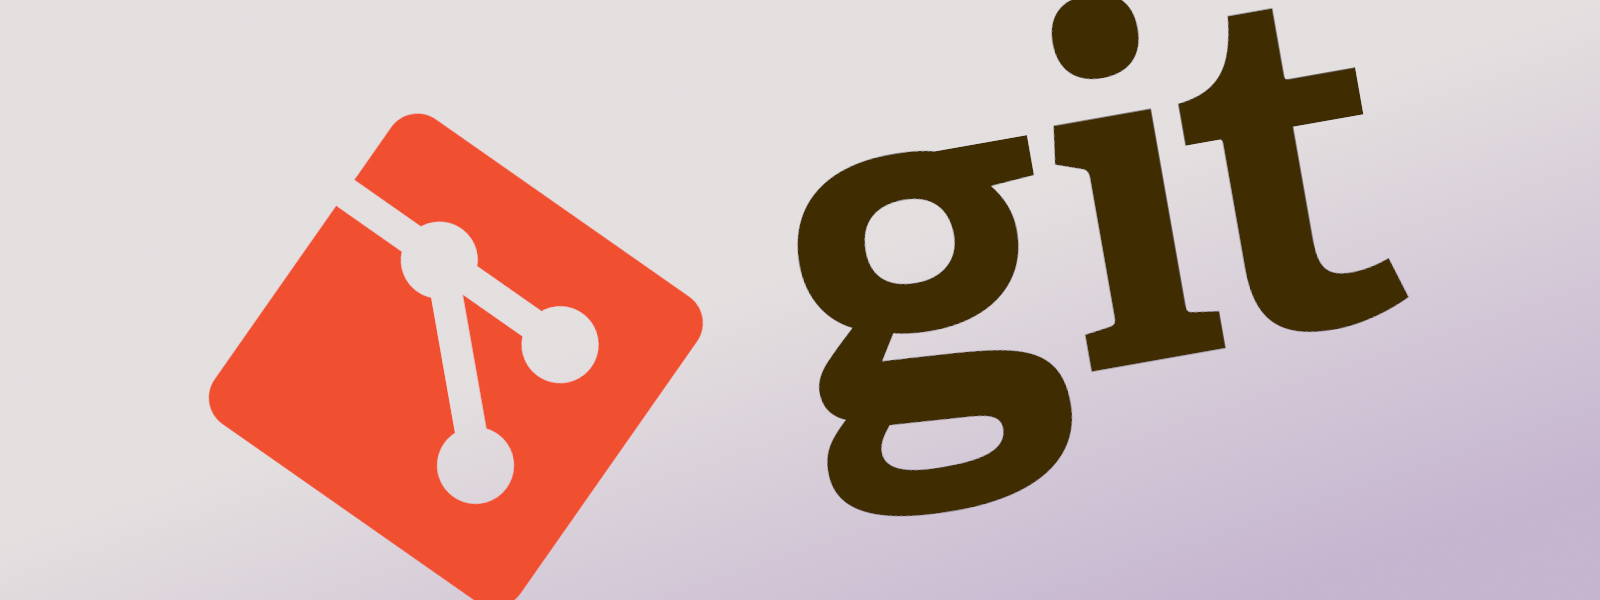 Our Journey to GIT